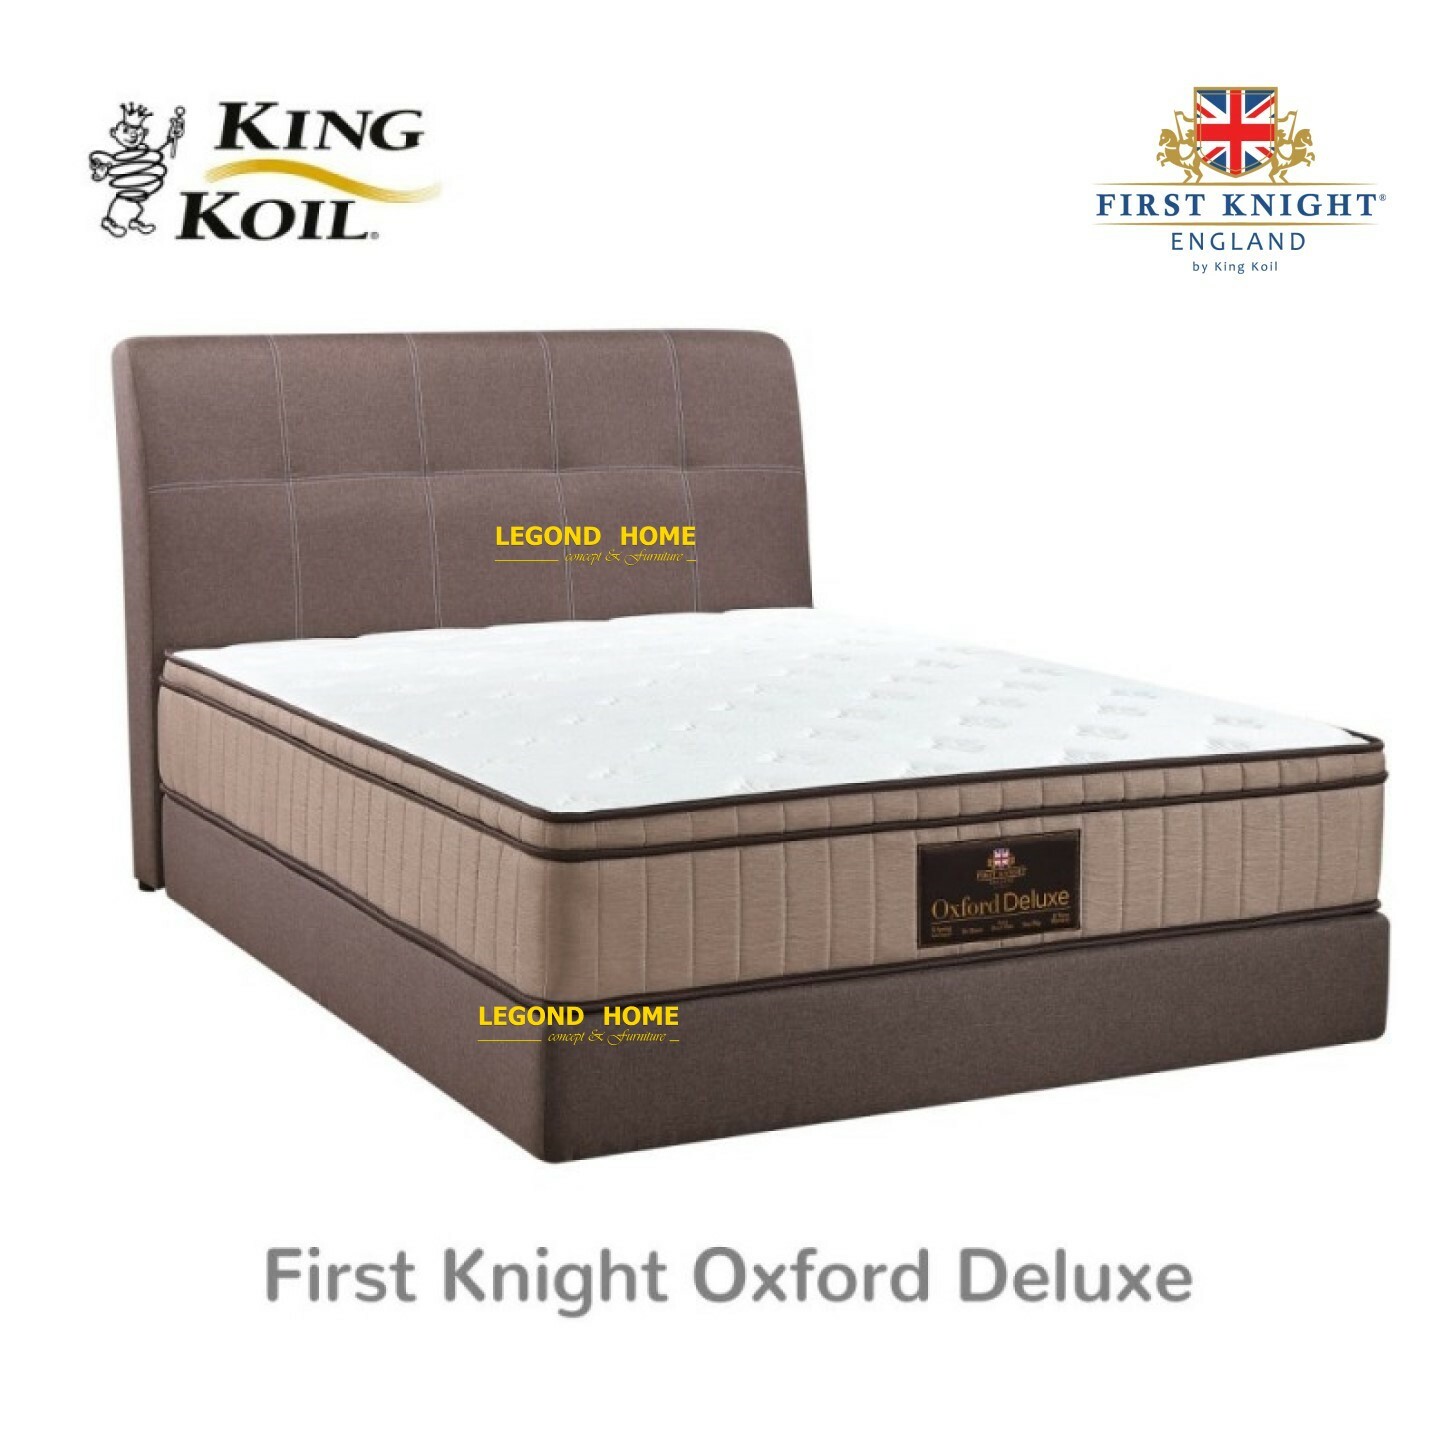 First-Knight-Oxford-Deluxe-Edit.jpg